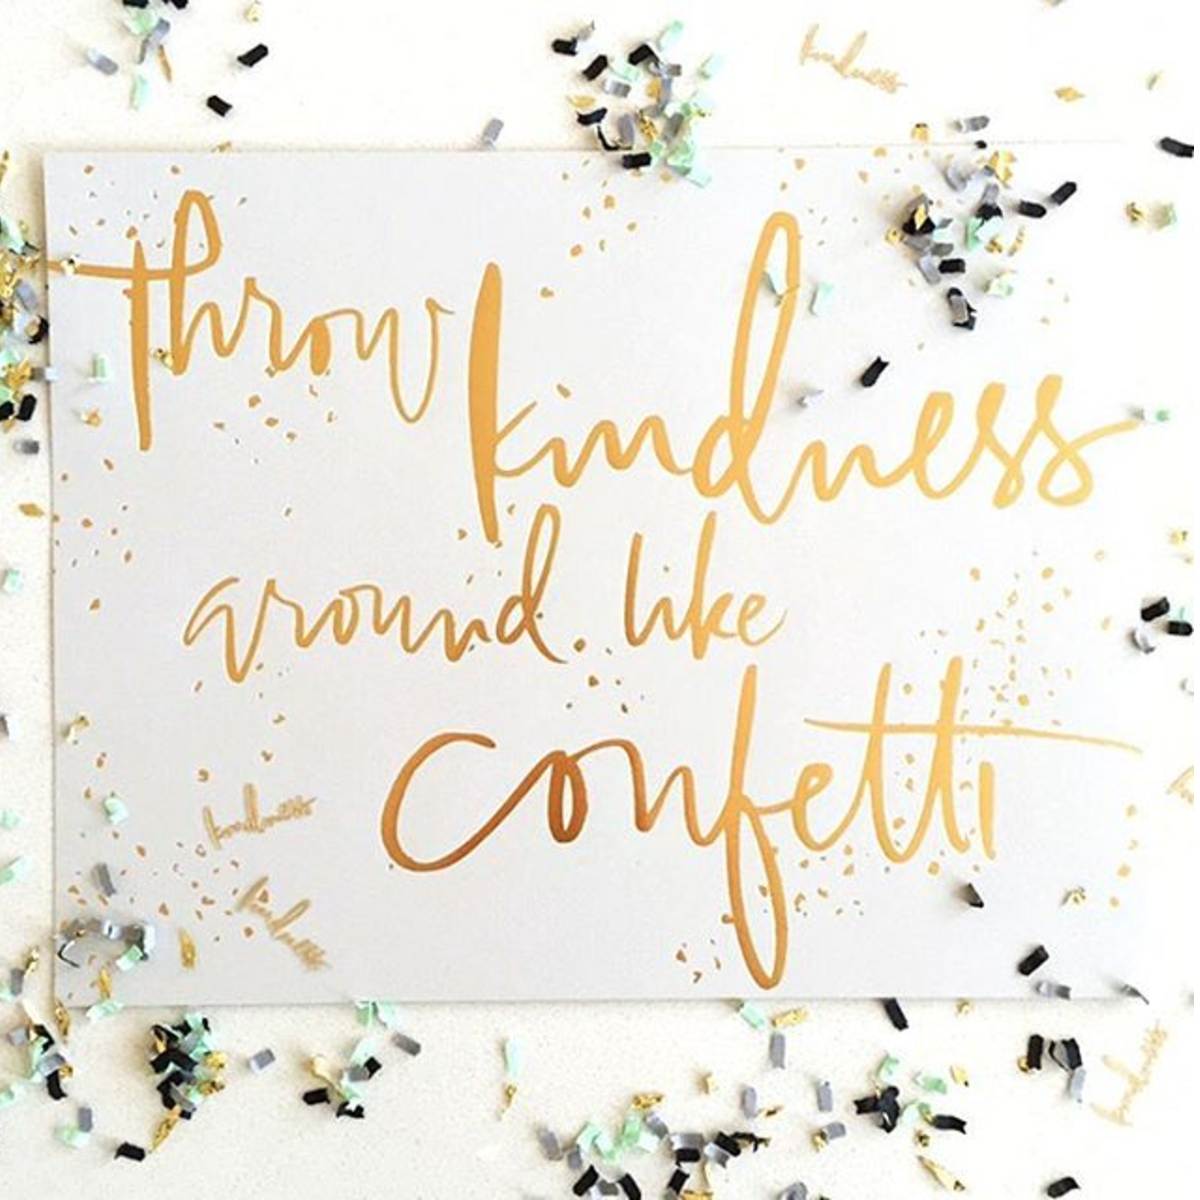 Anne Robin Calligraphy / Throw Kindness Around Like Confetti